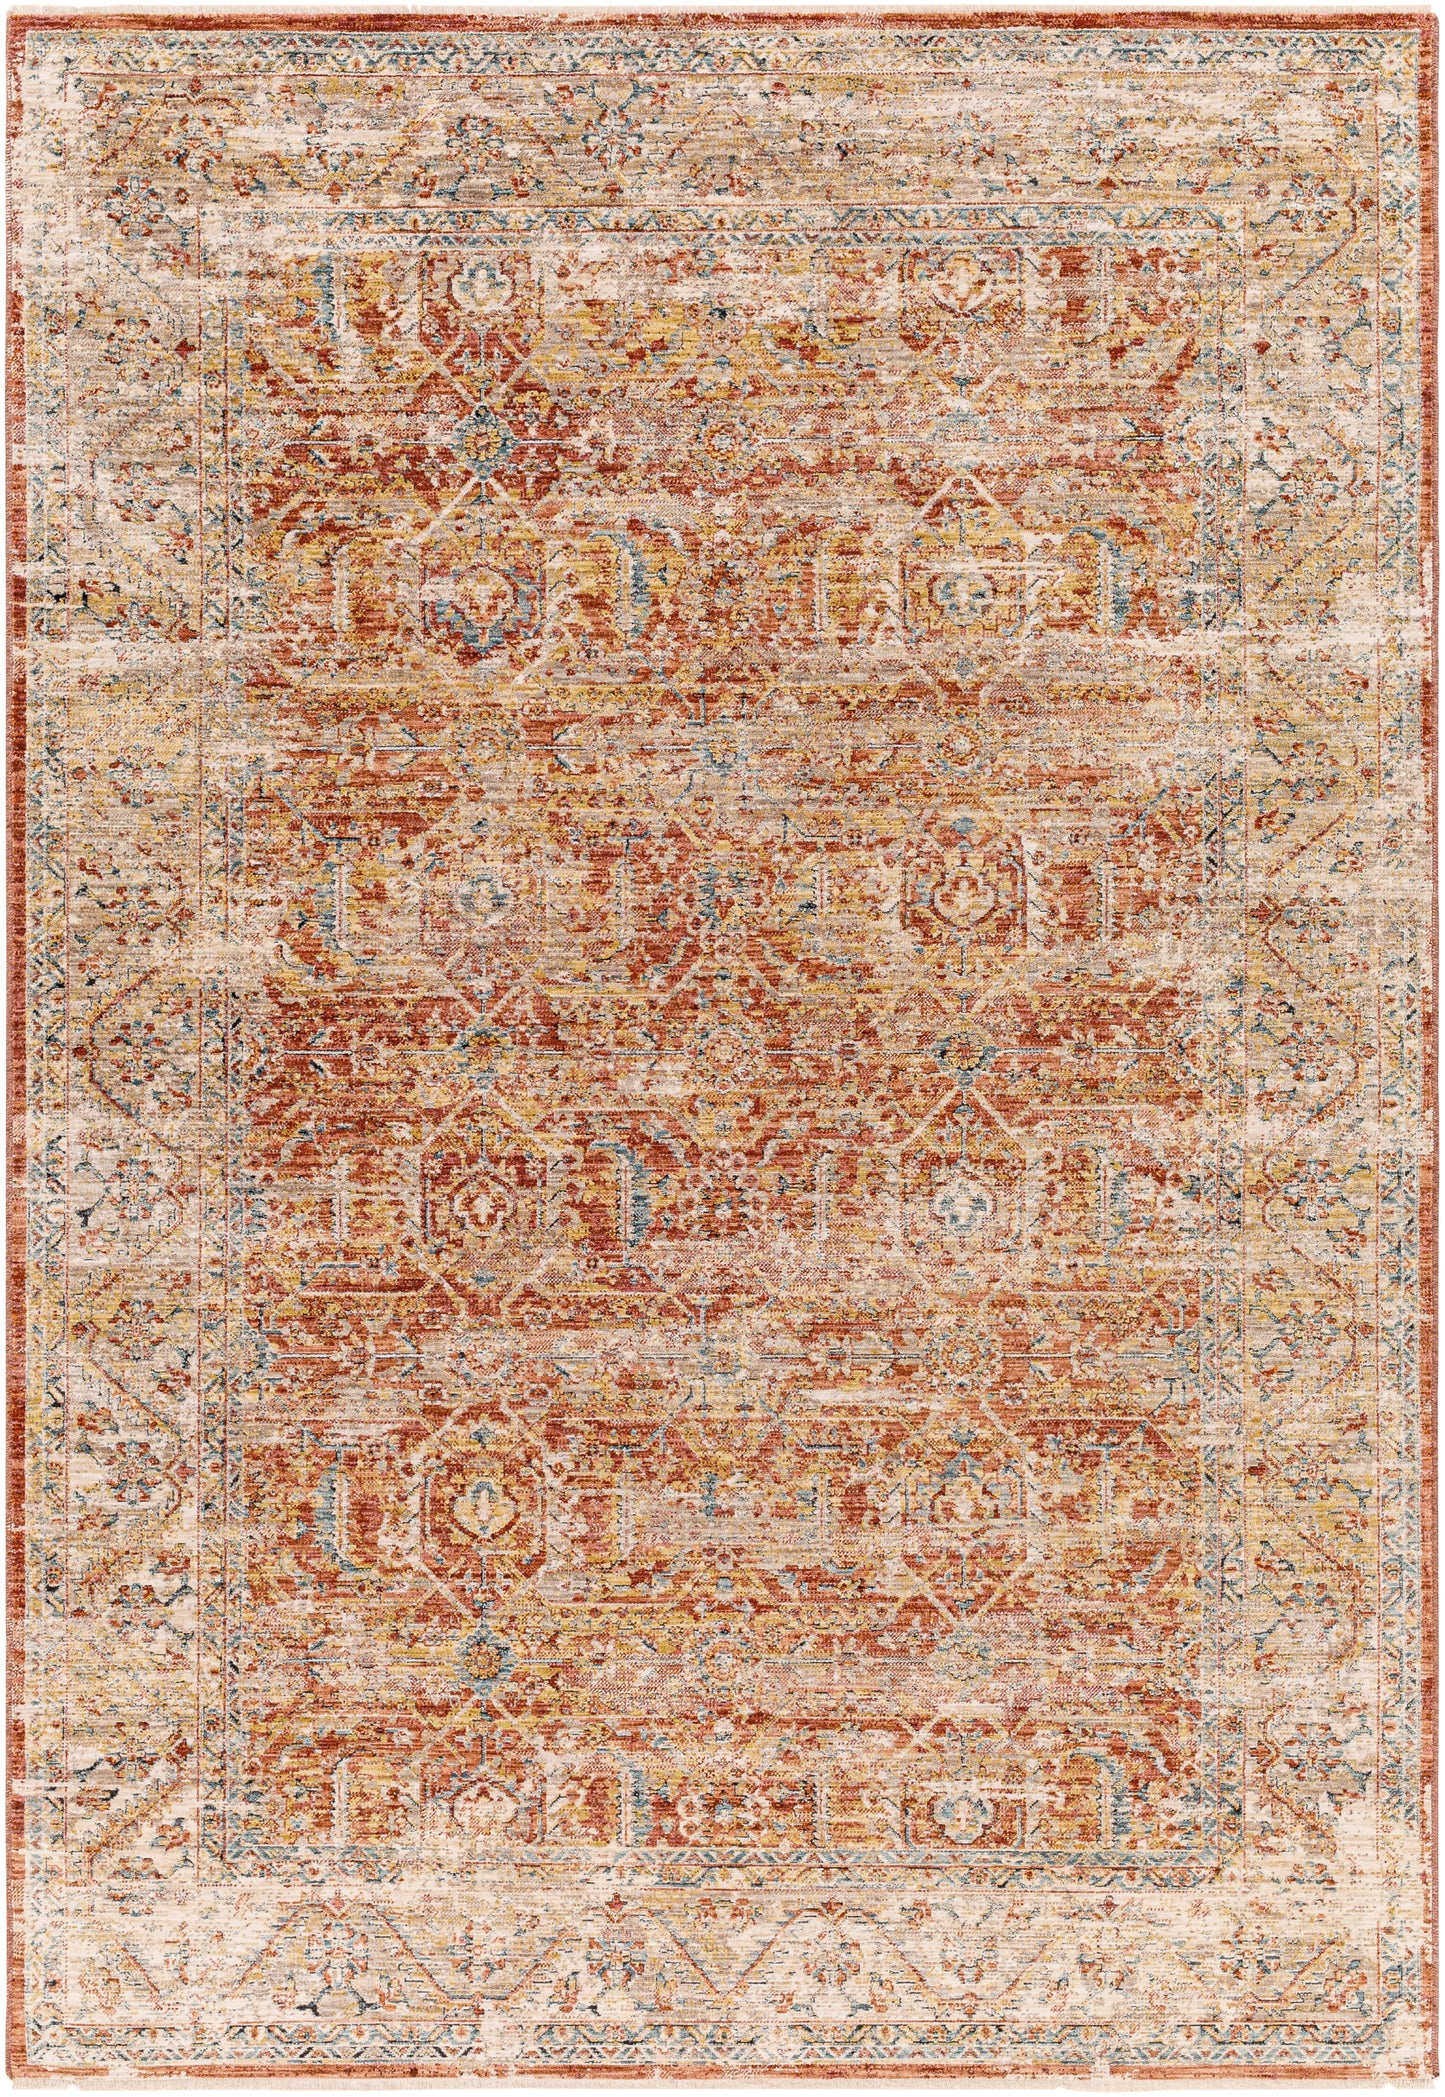 Aspendos 30434 Machine Woven Synthetic Blend Indoor Area Rug by Surya Rugs